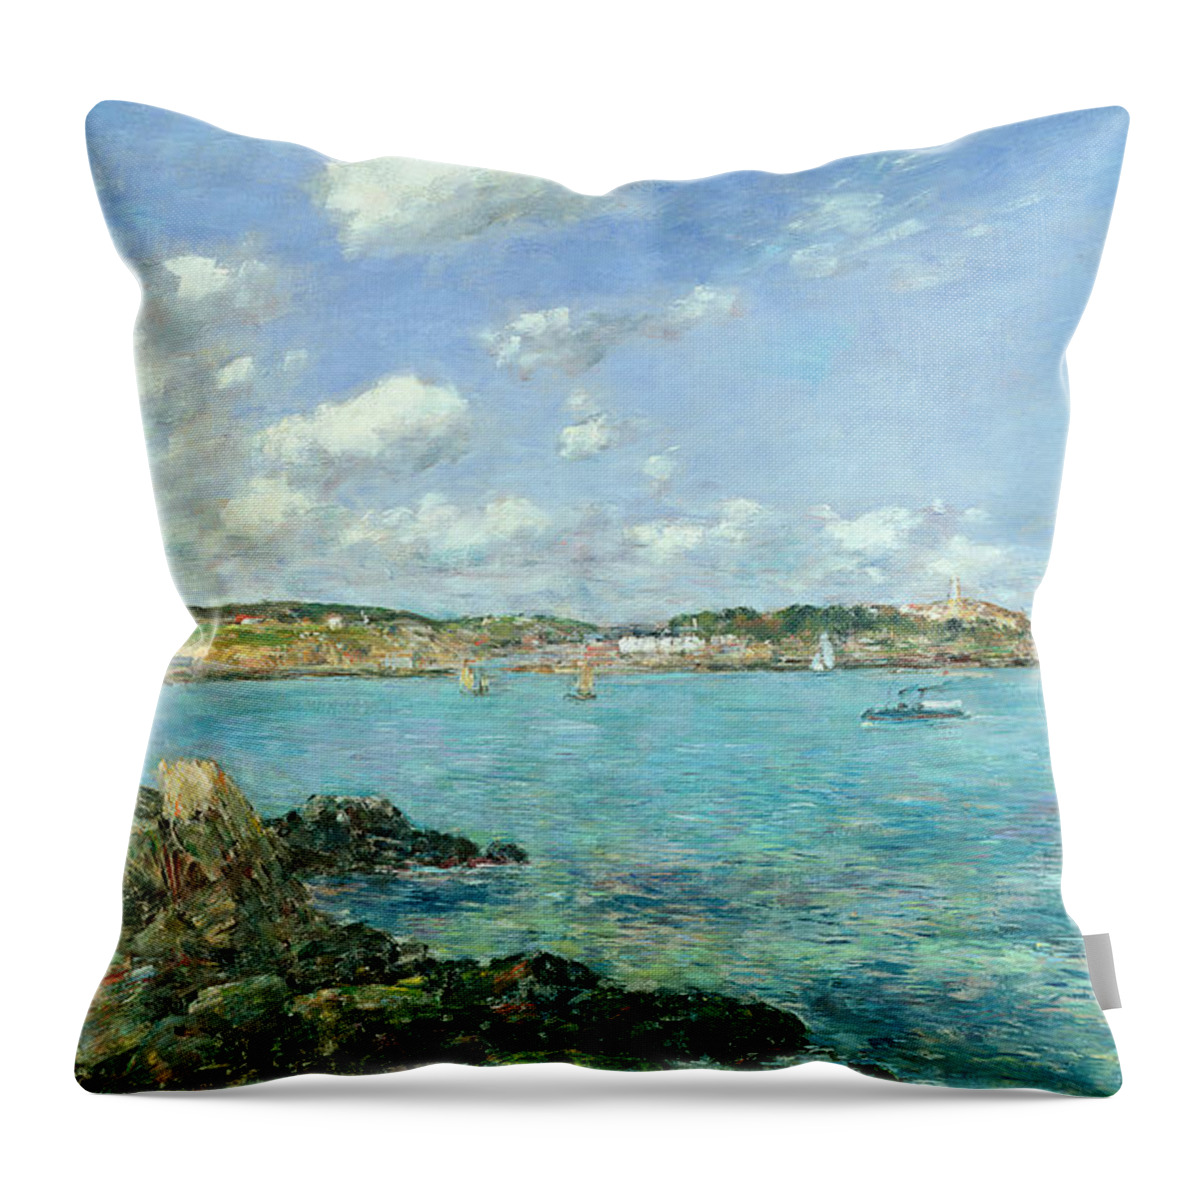 The Throw Pillow featuring the painting The Bay of Douarnenez by Eugene Louis Boudin